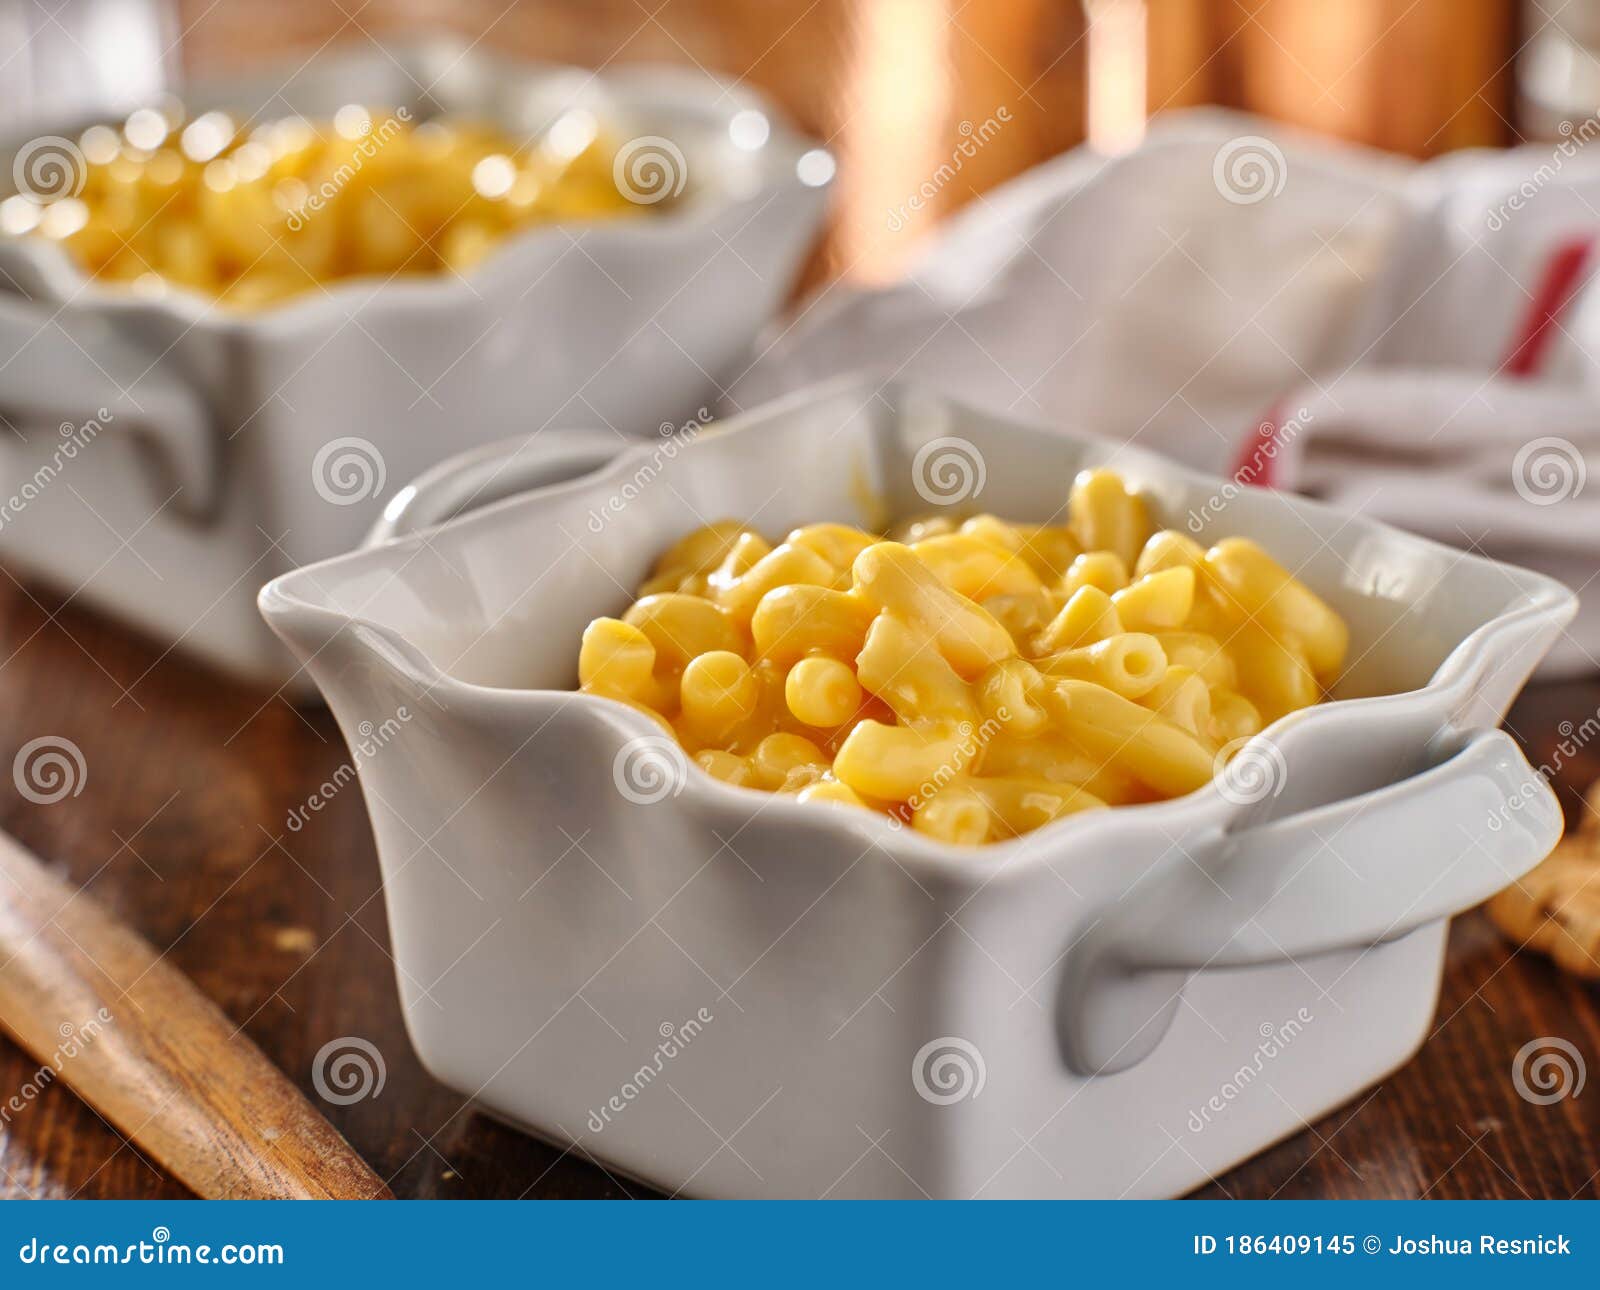 Creamy Mac And Cheese In Dish Stock Image Image Of Pasta Yellow 186409145